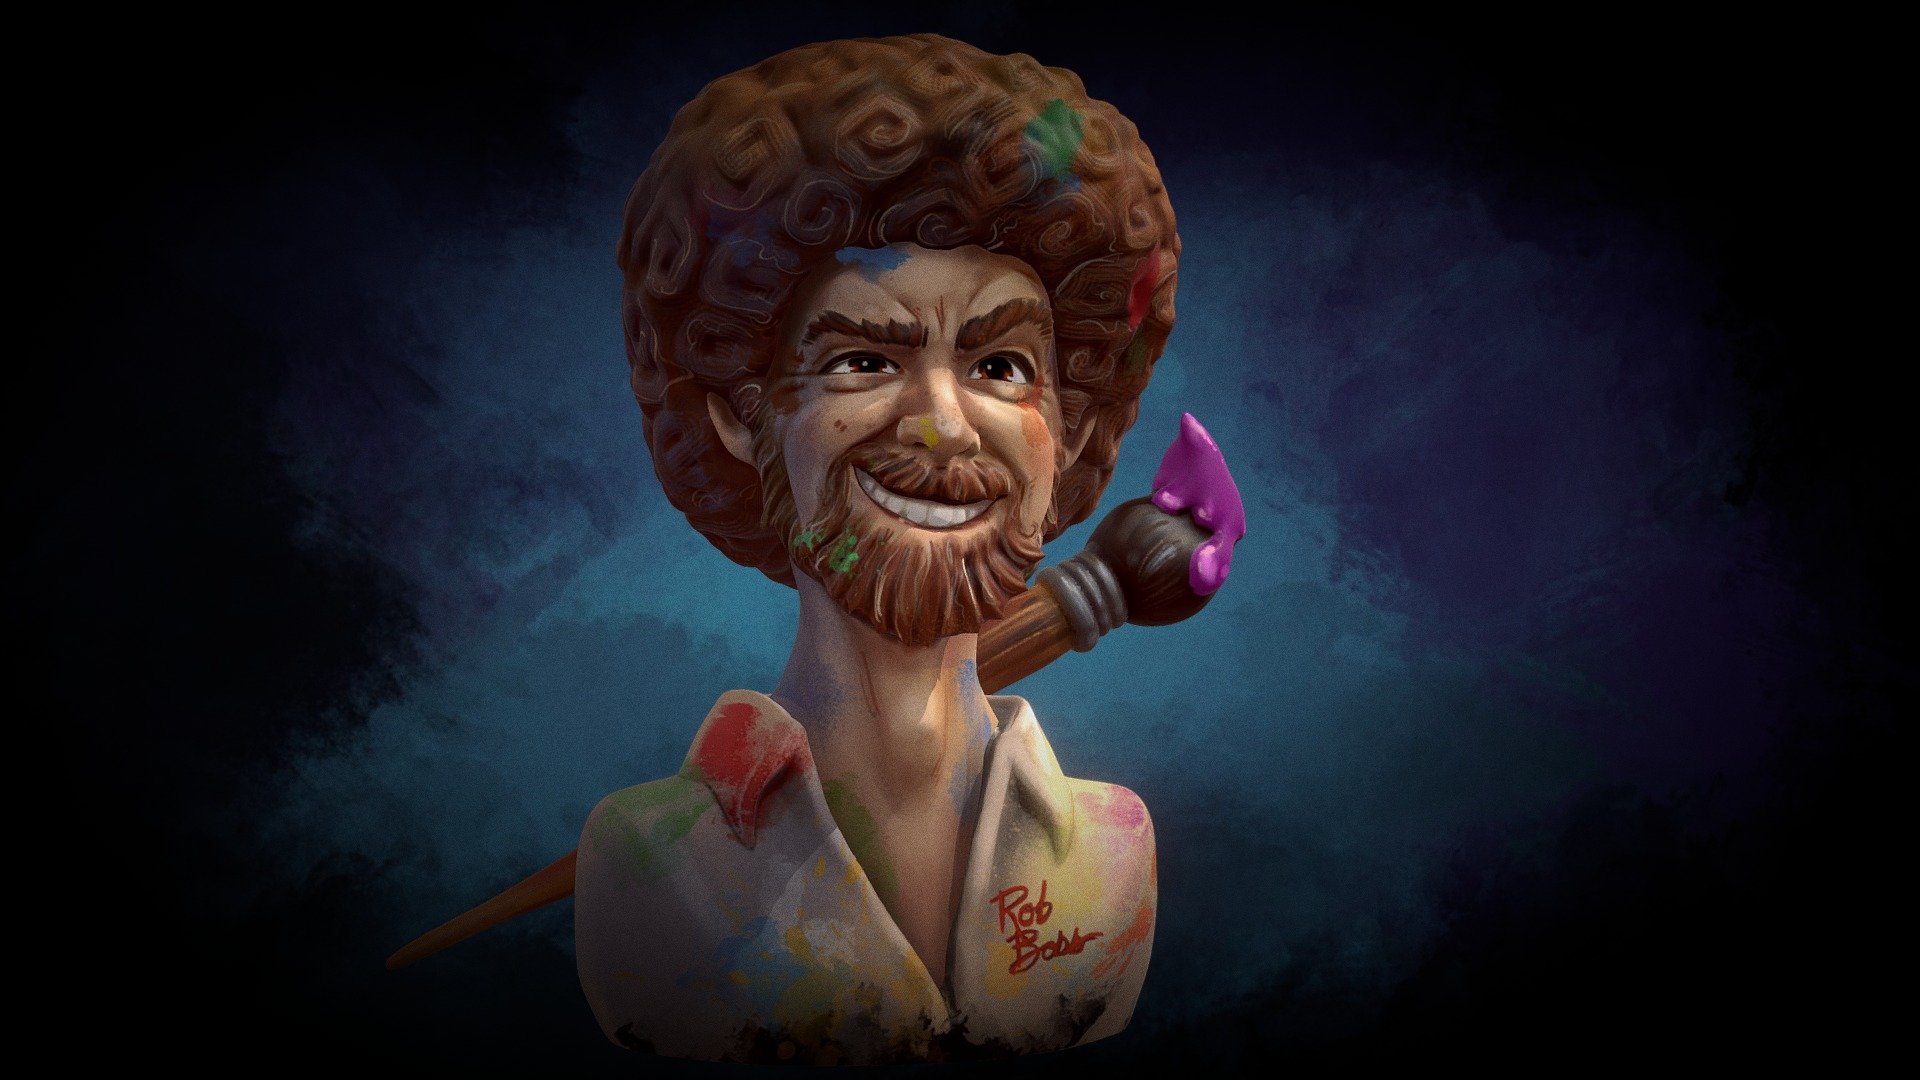 Bob Ross, the legend.
Hand-sculpted in Nomad and hand-painted in Procreate all on the iPad!  Feel free to download the model and give him a fresh coat of paint on your own!

Watch a speed walkthrough video of the creation process here:
https://youtu.be/IMRf65_iBUc - Rob Boss - 3D model by eric3dee 3d model